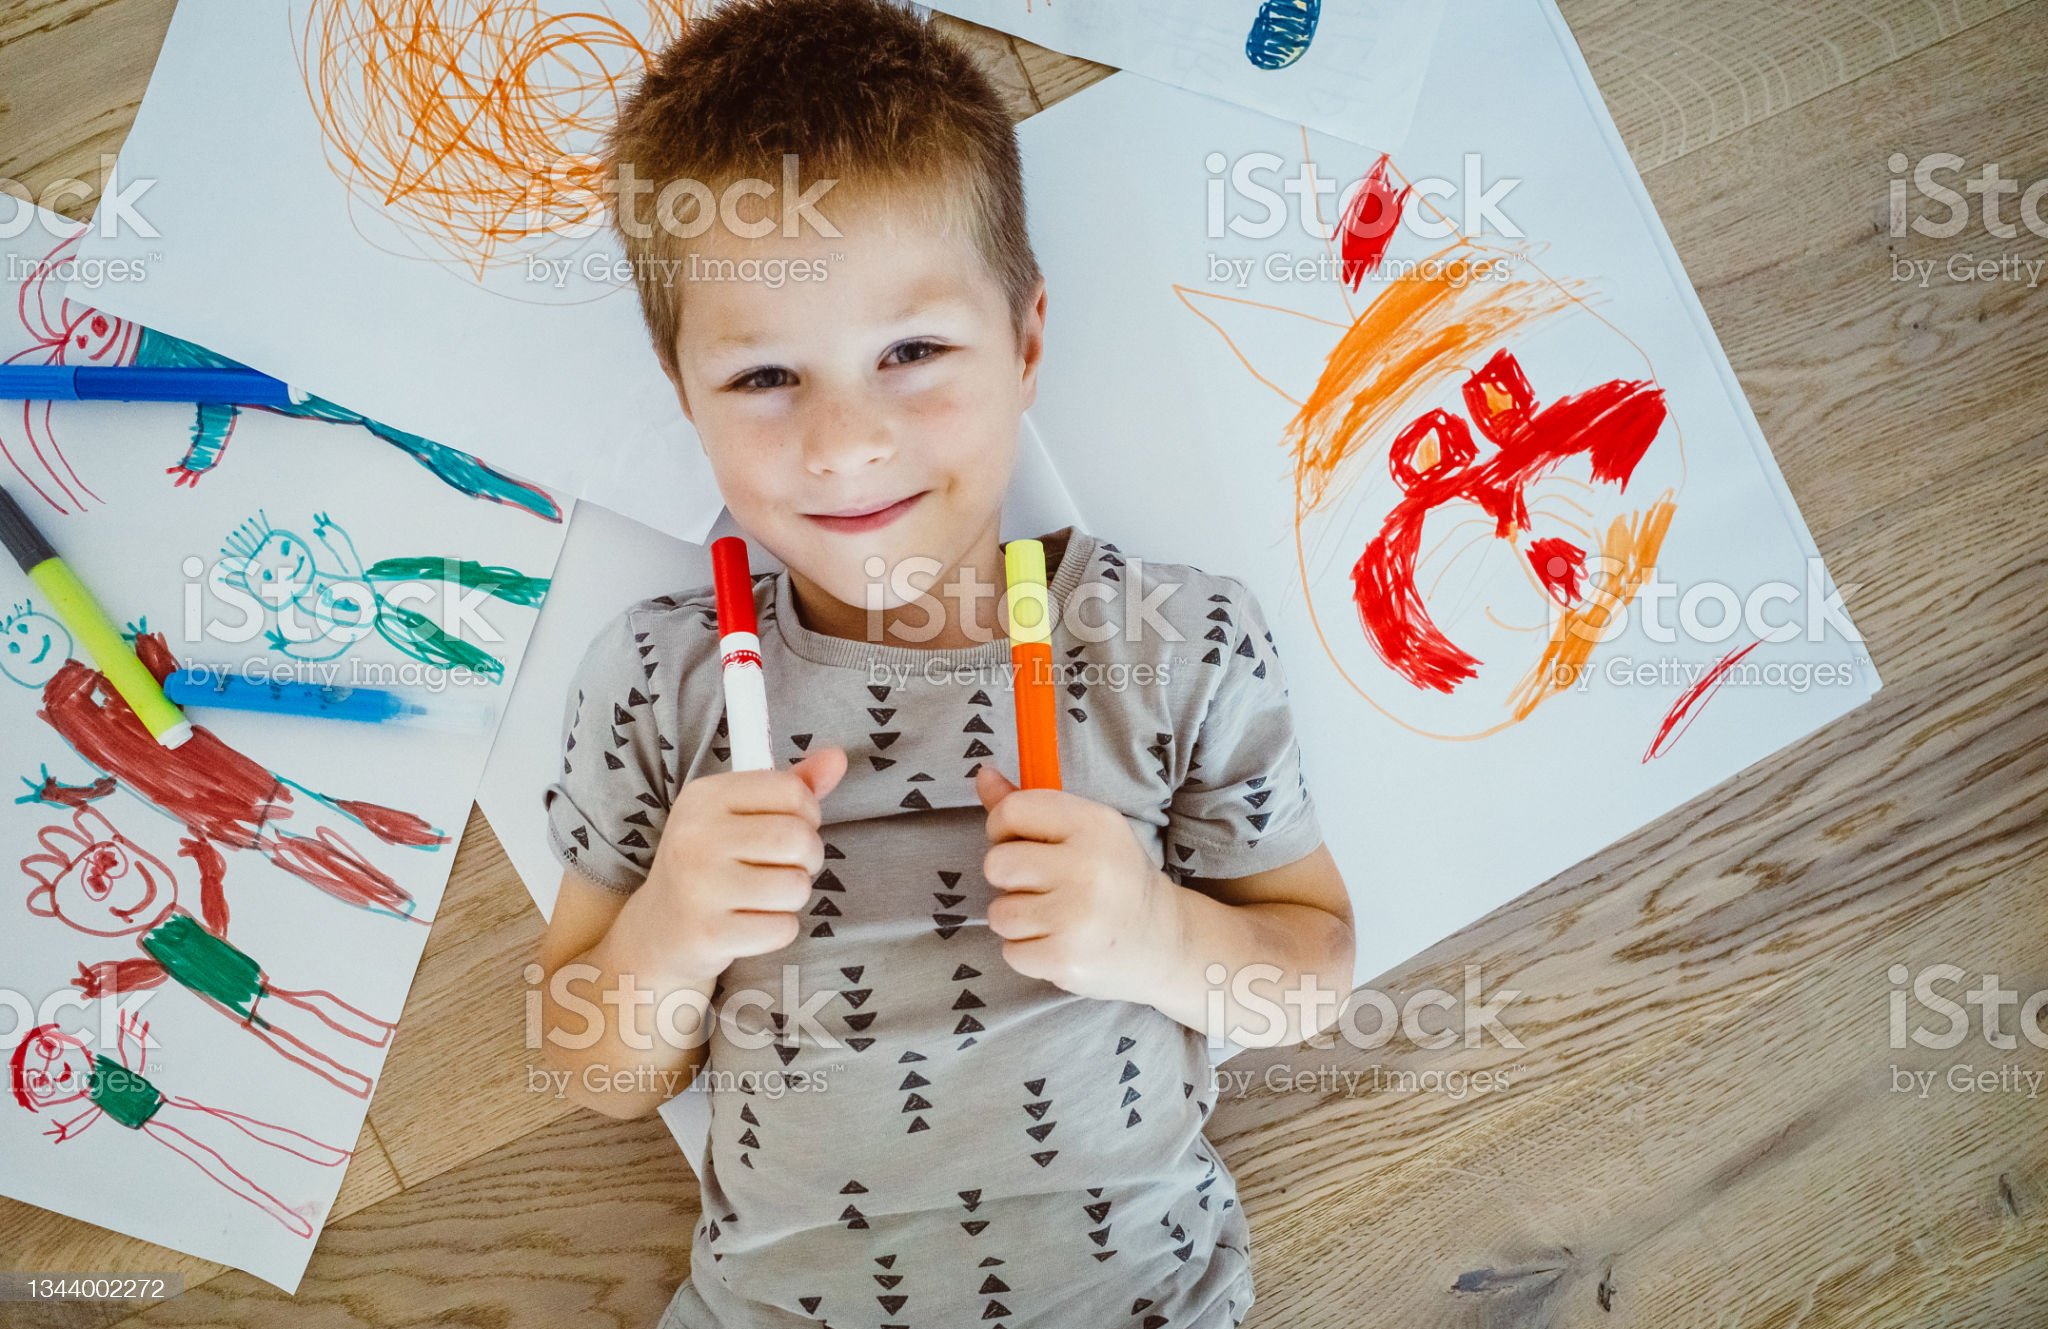 What are 10 creative things I could do with my kids’ art?